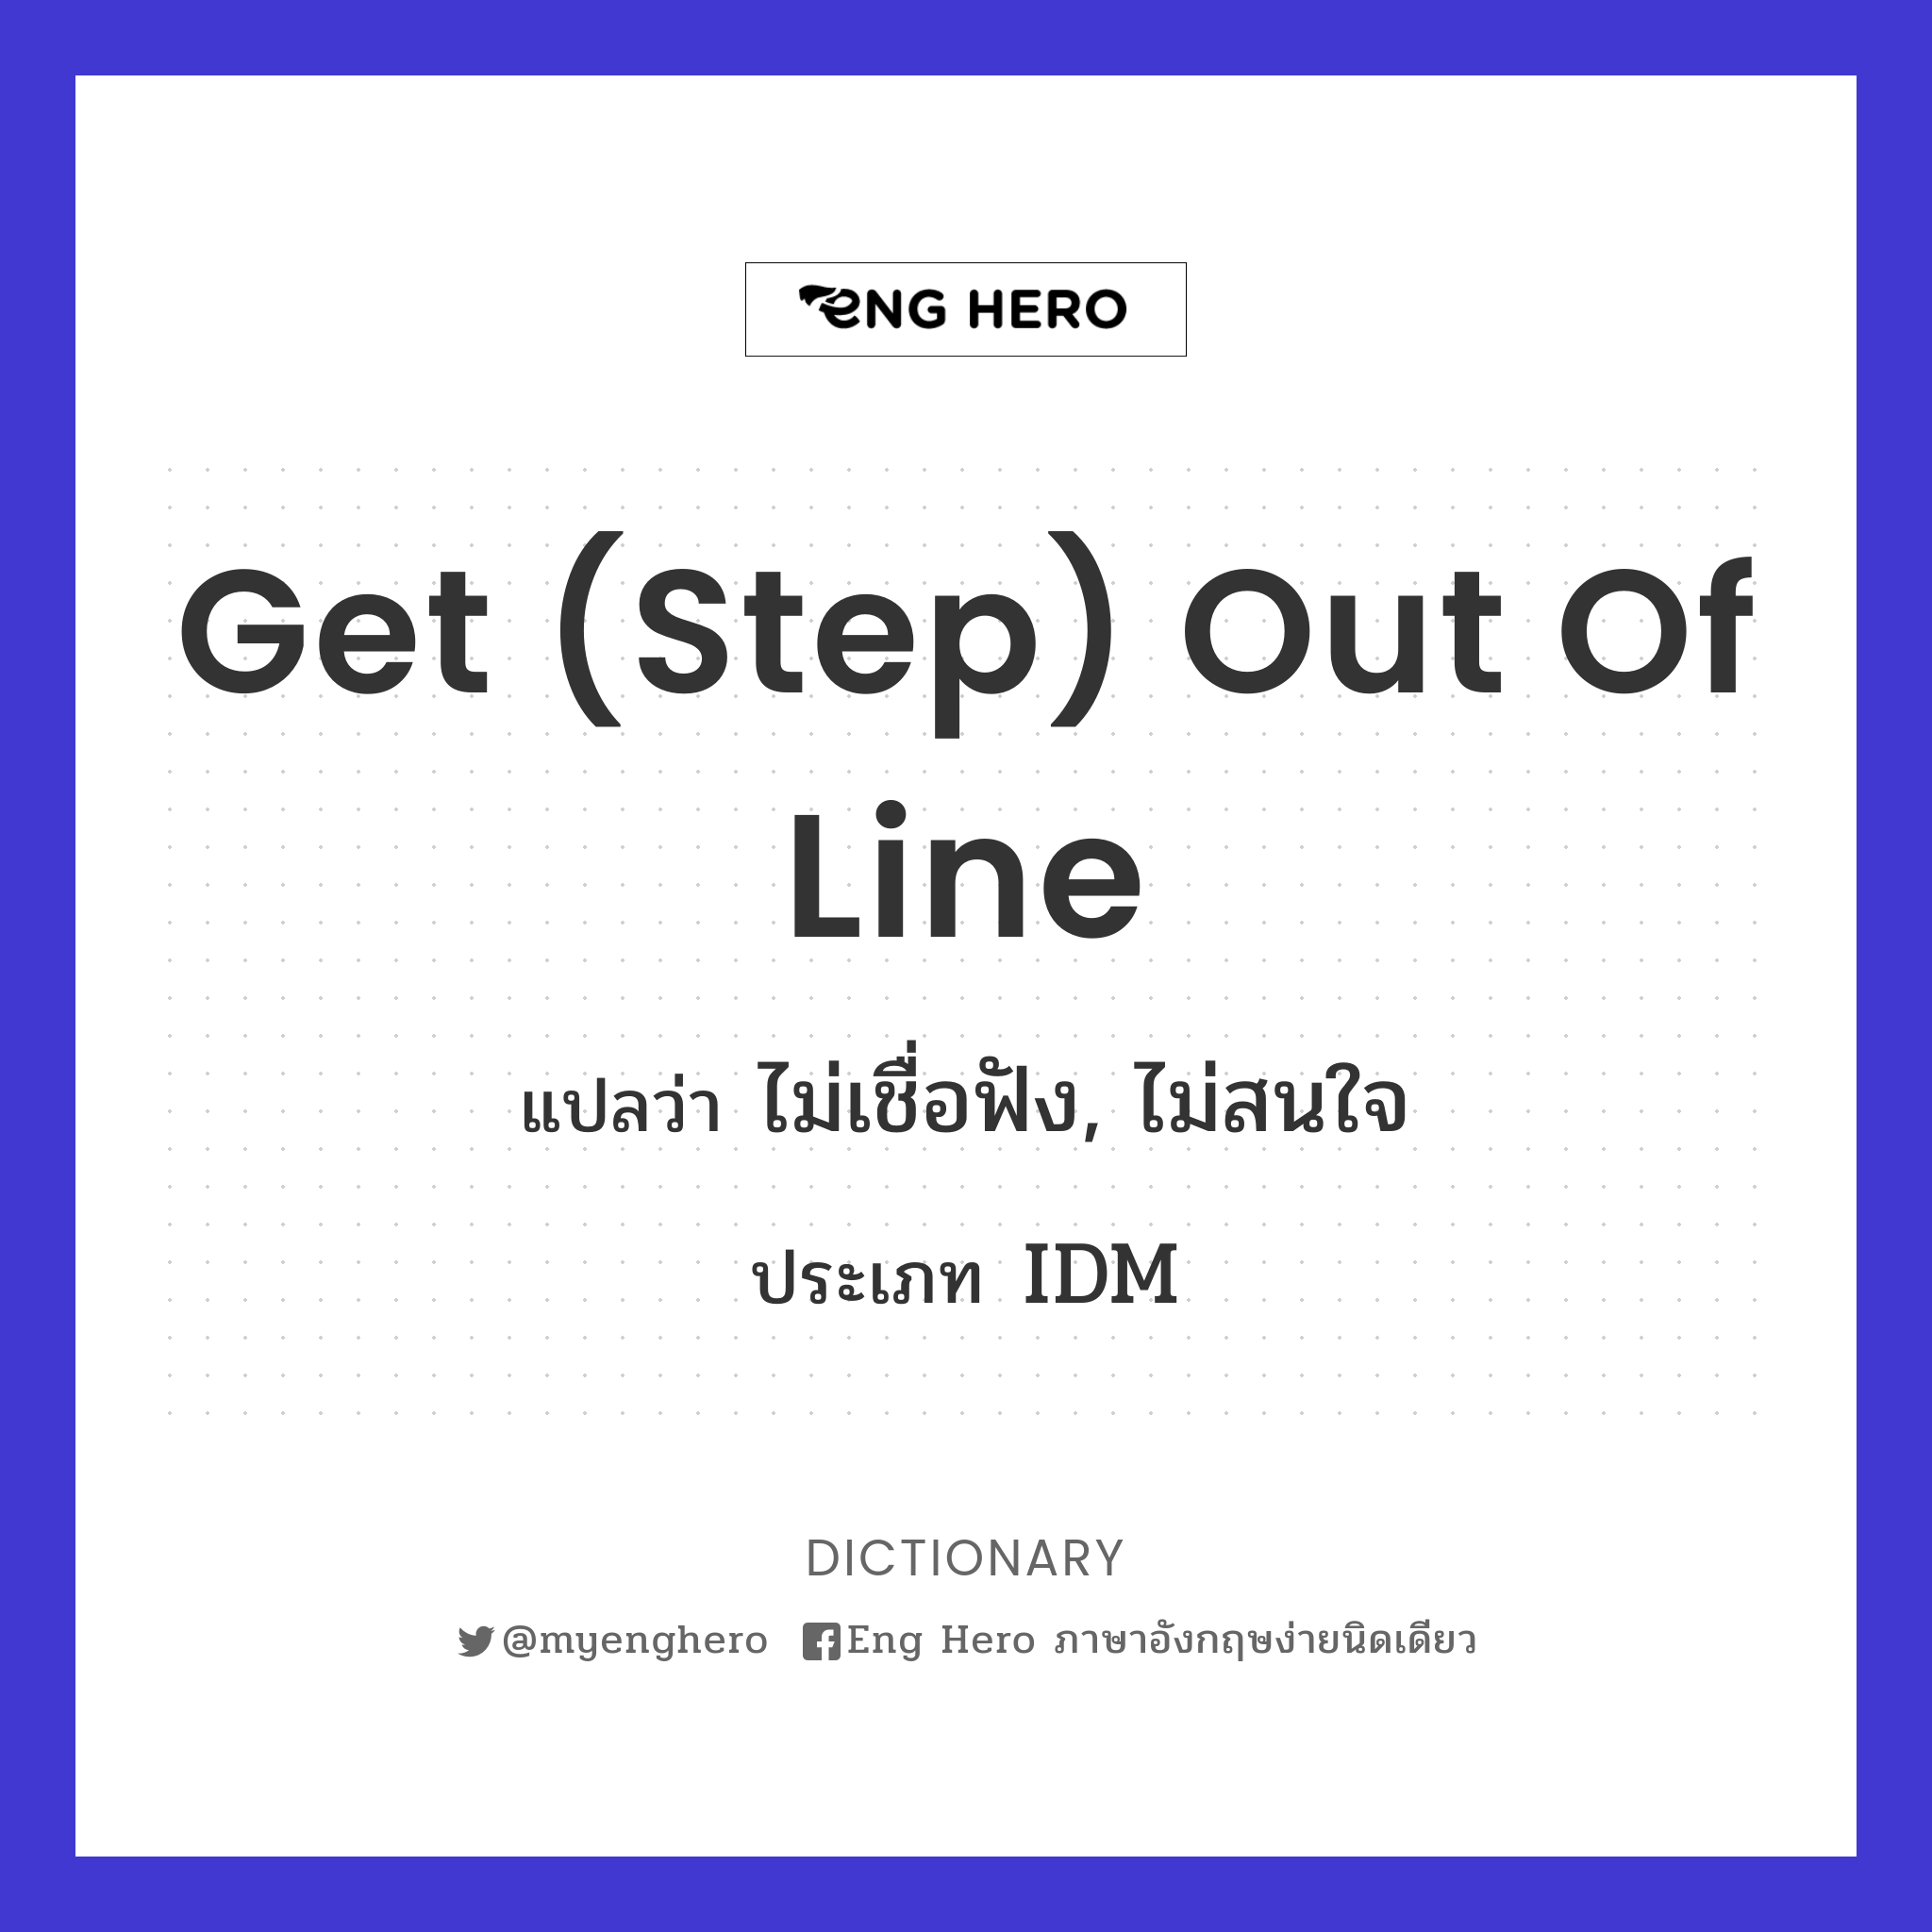 get (step) out of line